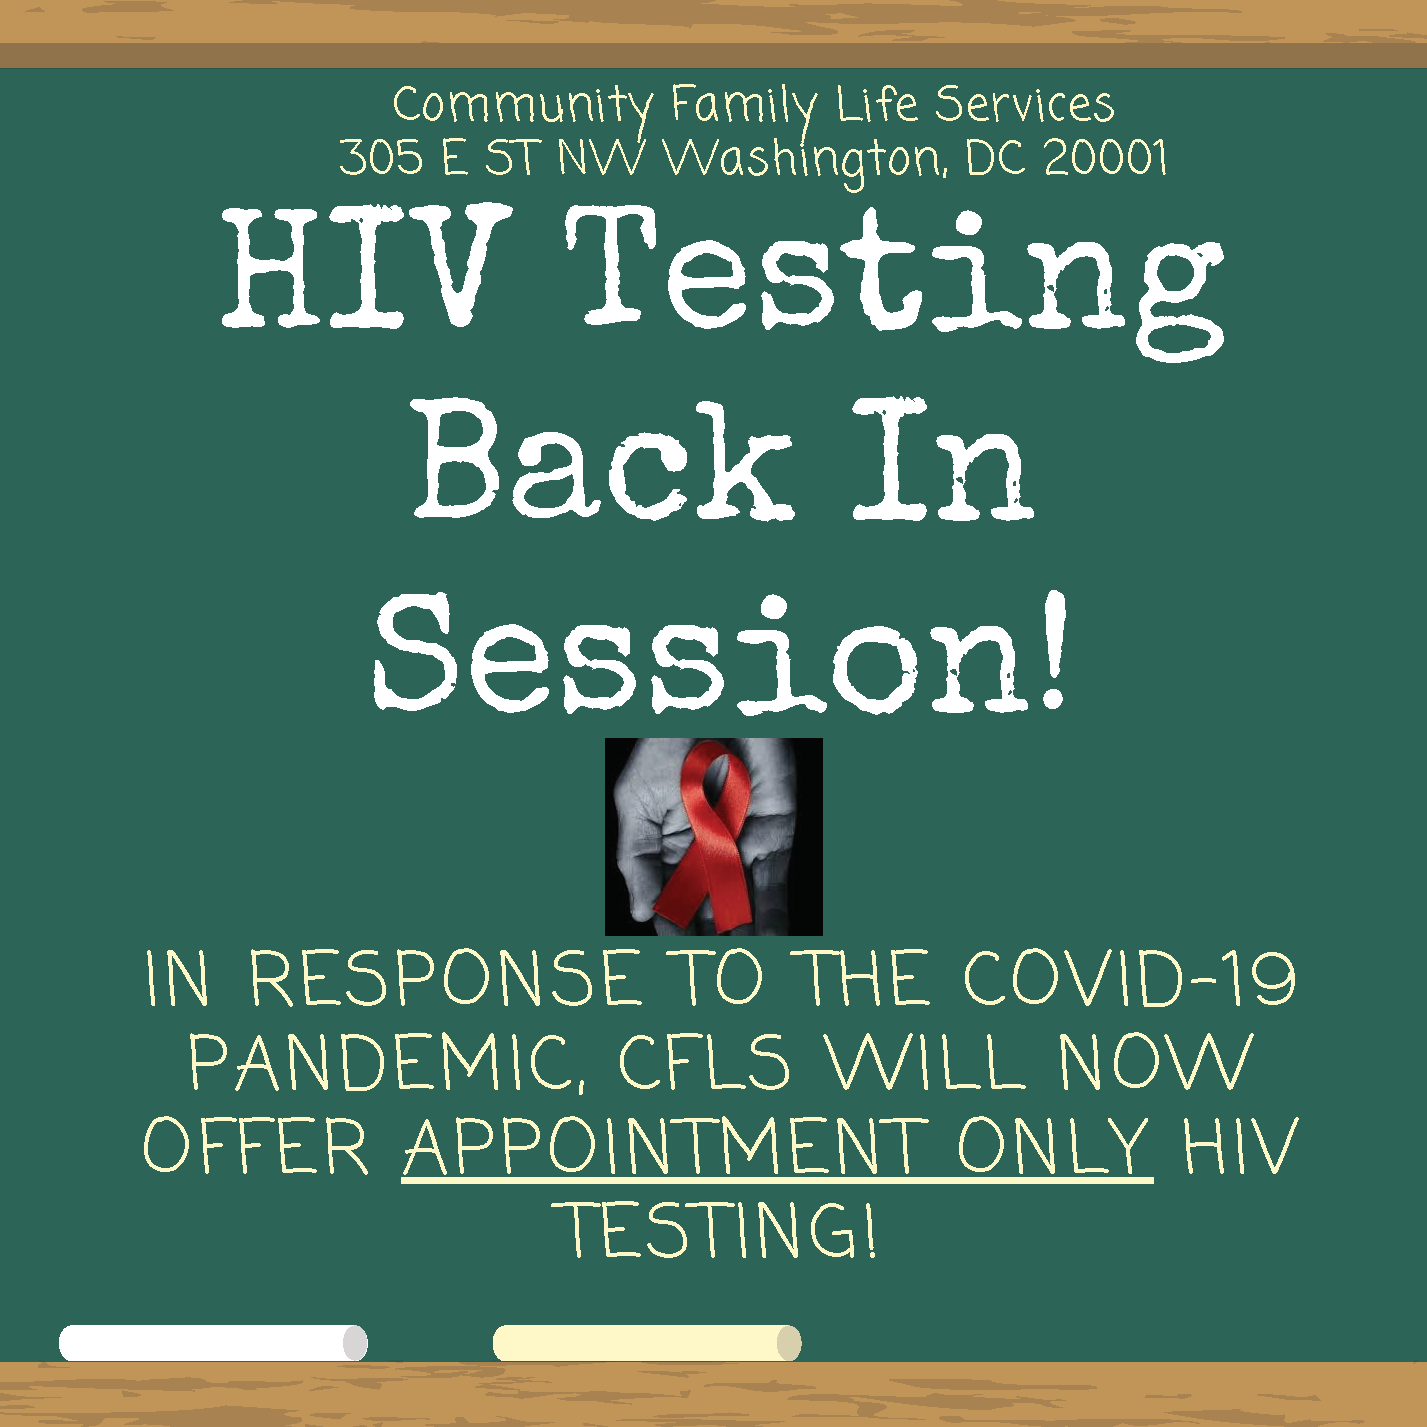 HIV Testing Back in Session! In response to the COVID-19 pandemic, CFLS will now offer appointment only HIV testing!